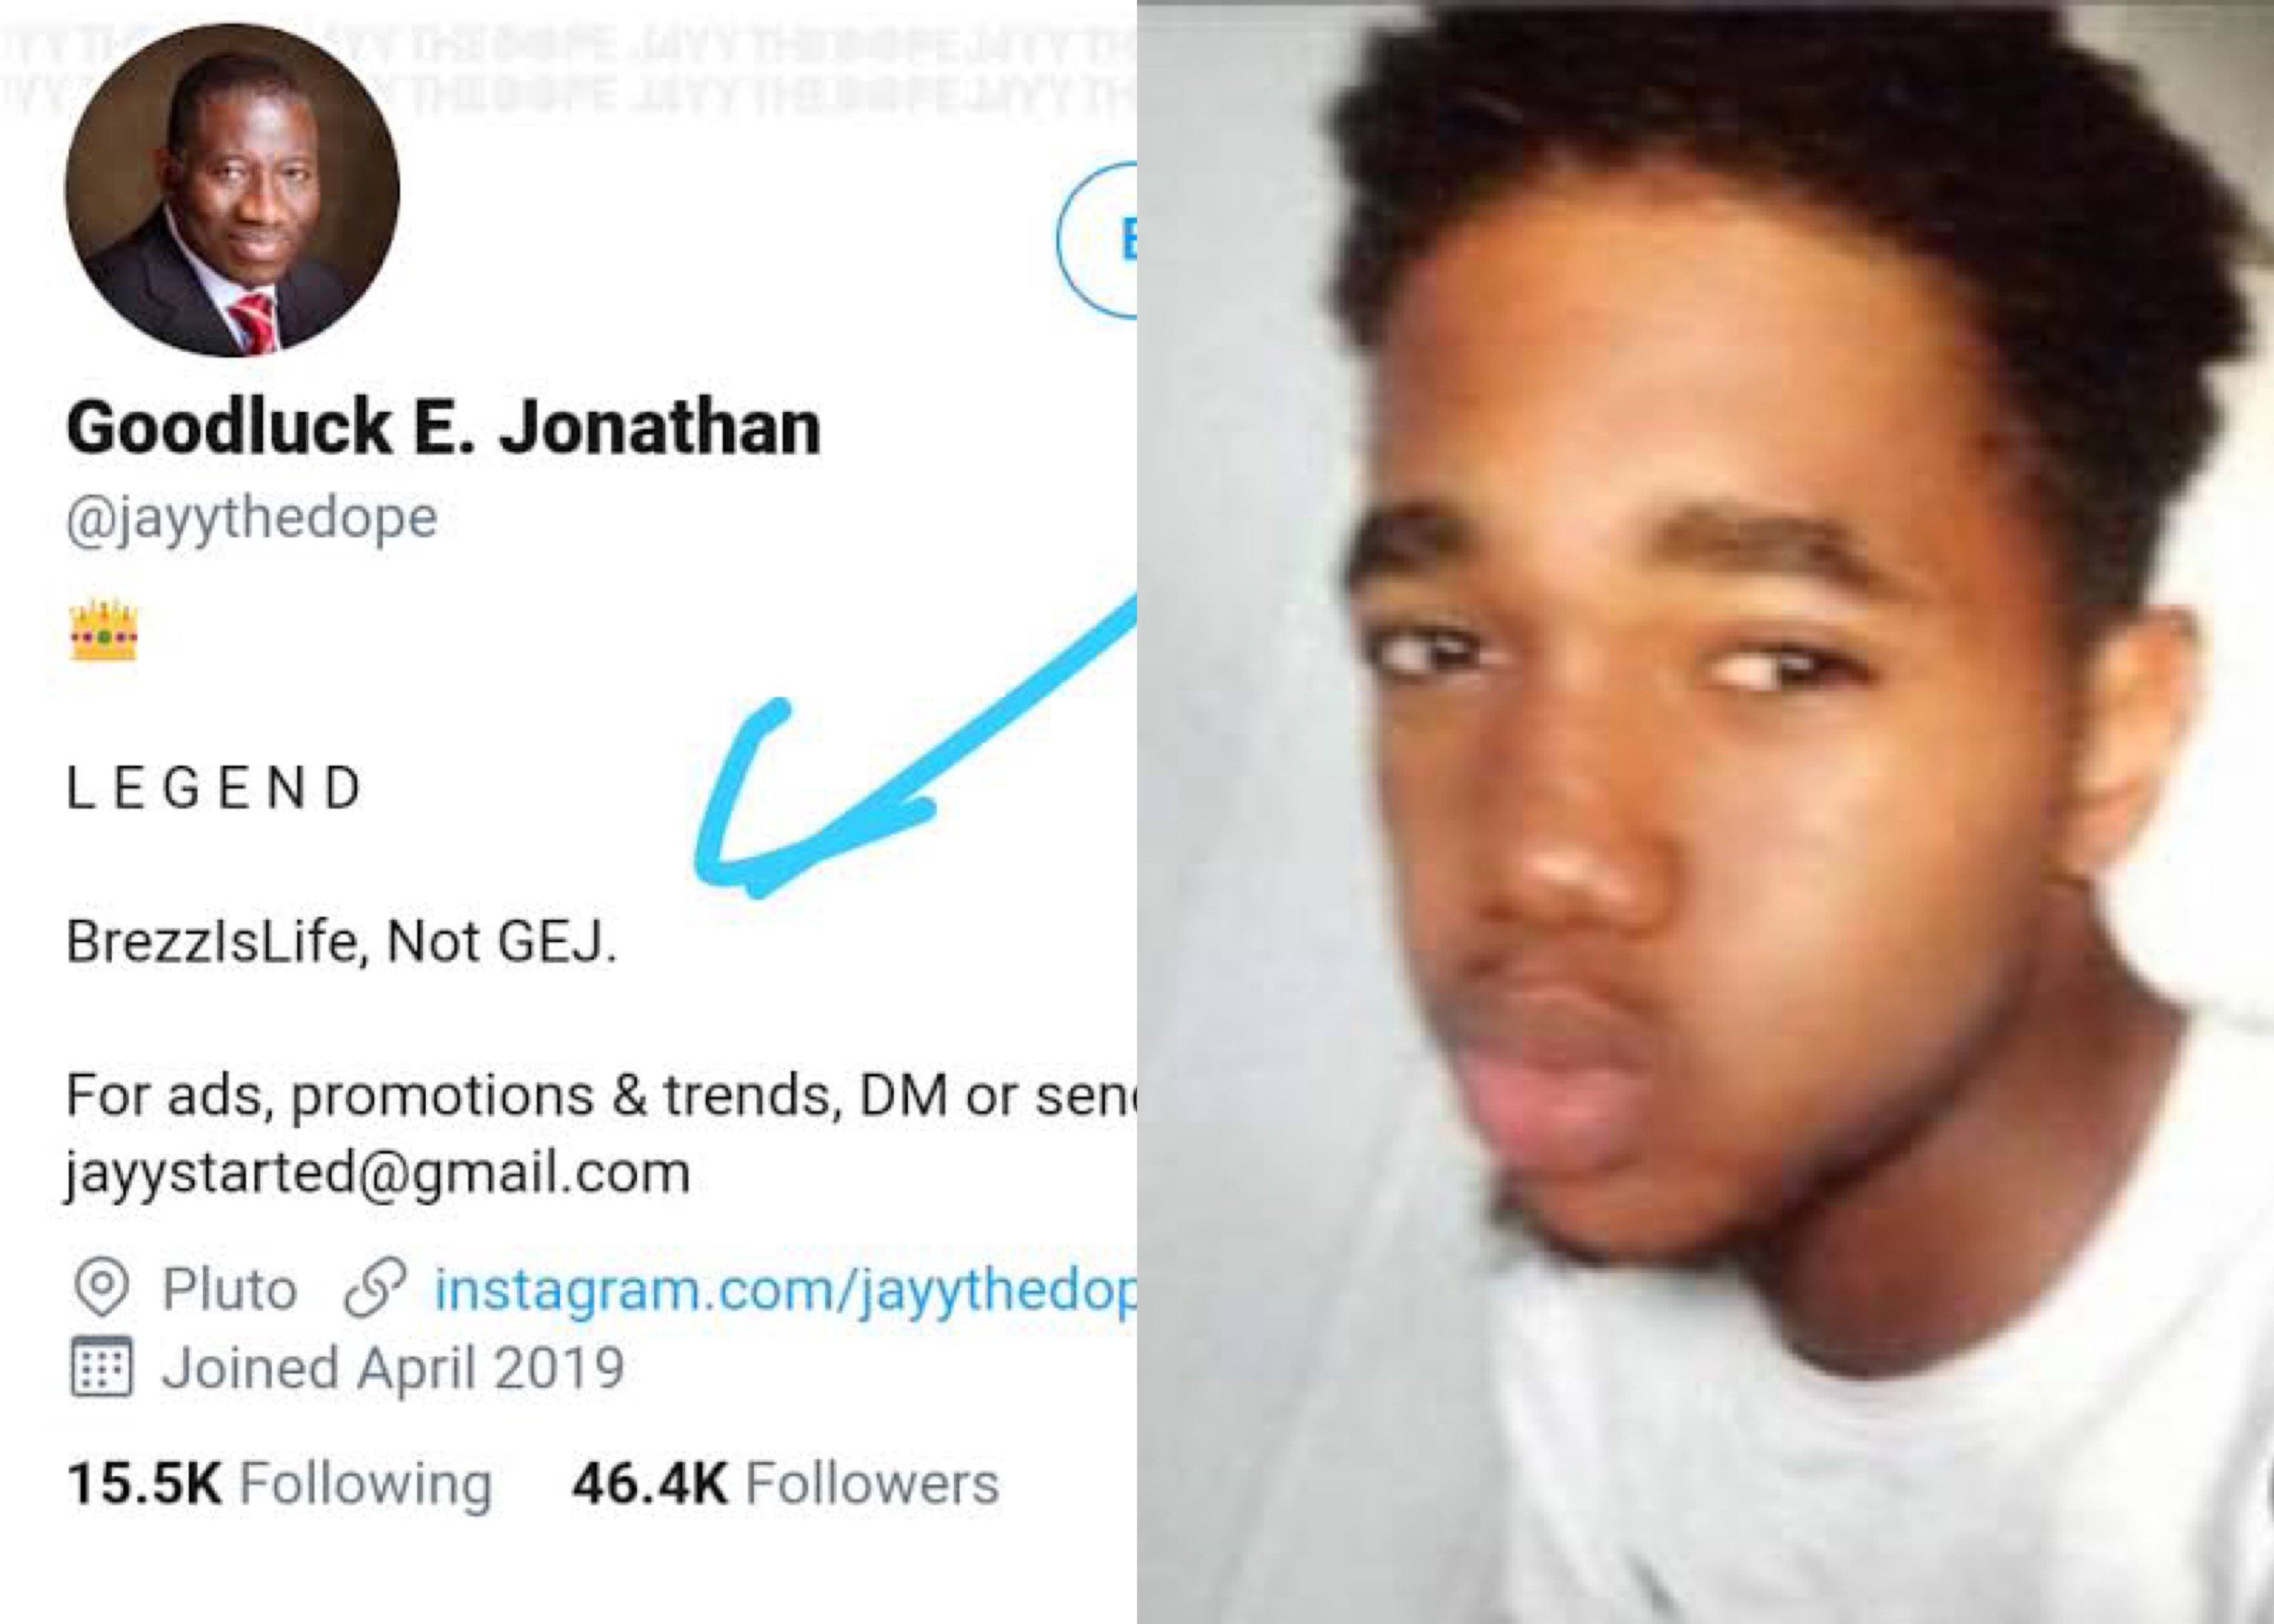 Student Arrested For Opening Goodluck Jonathan Parody Twitter Account Allegedly Denied Access To Lawyers